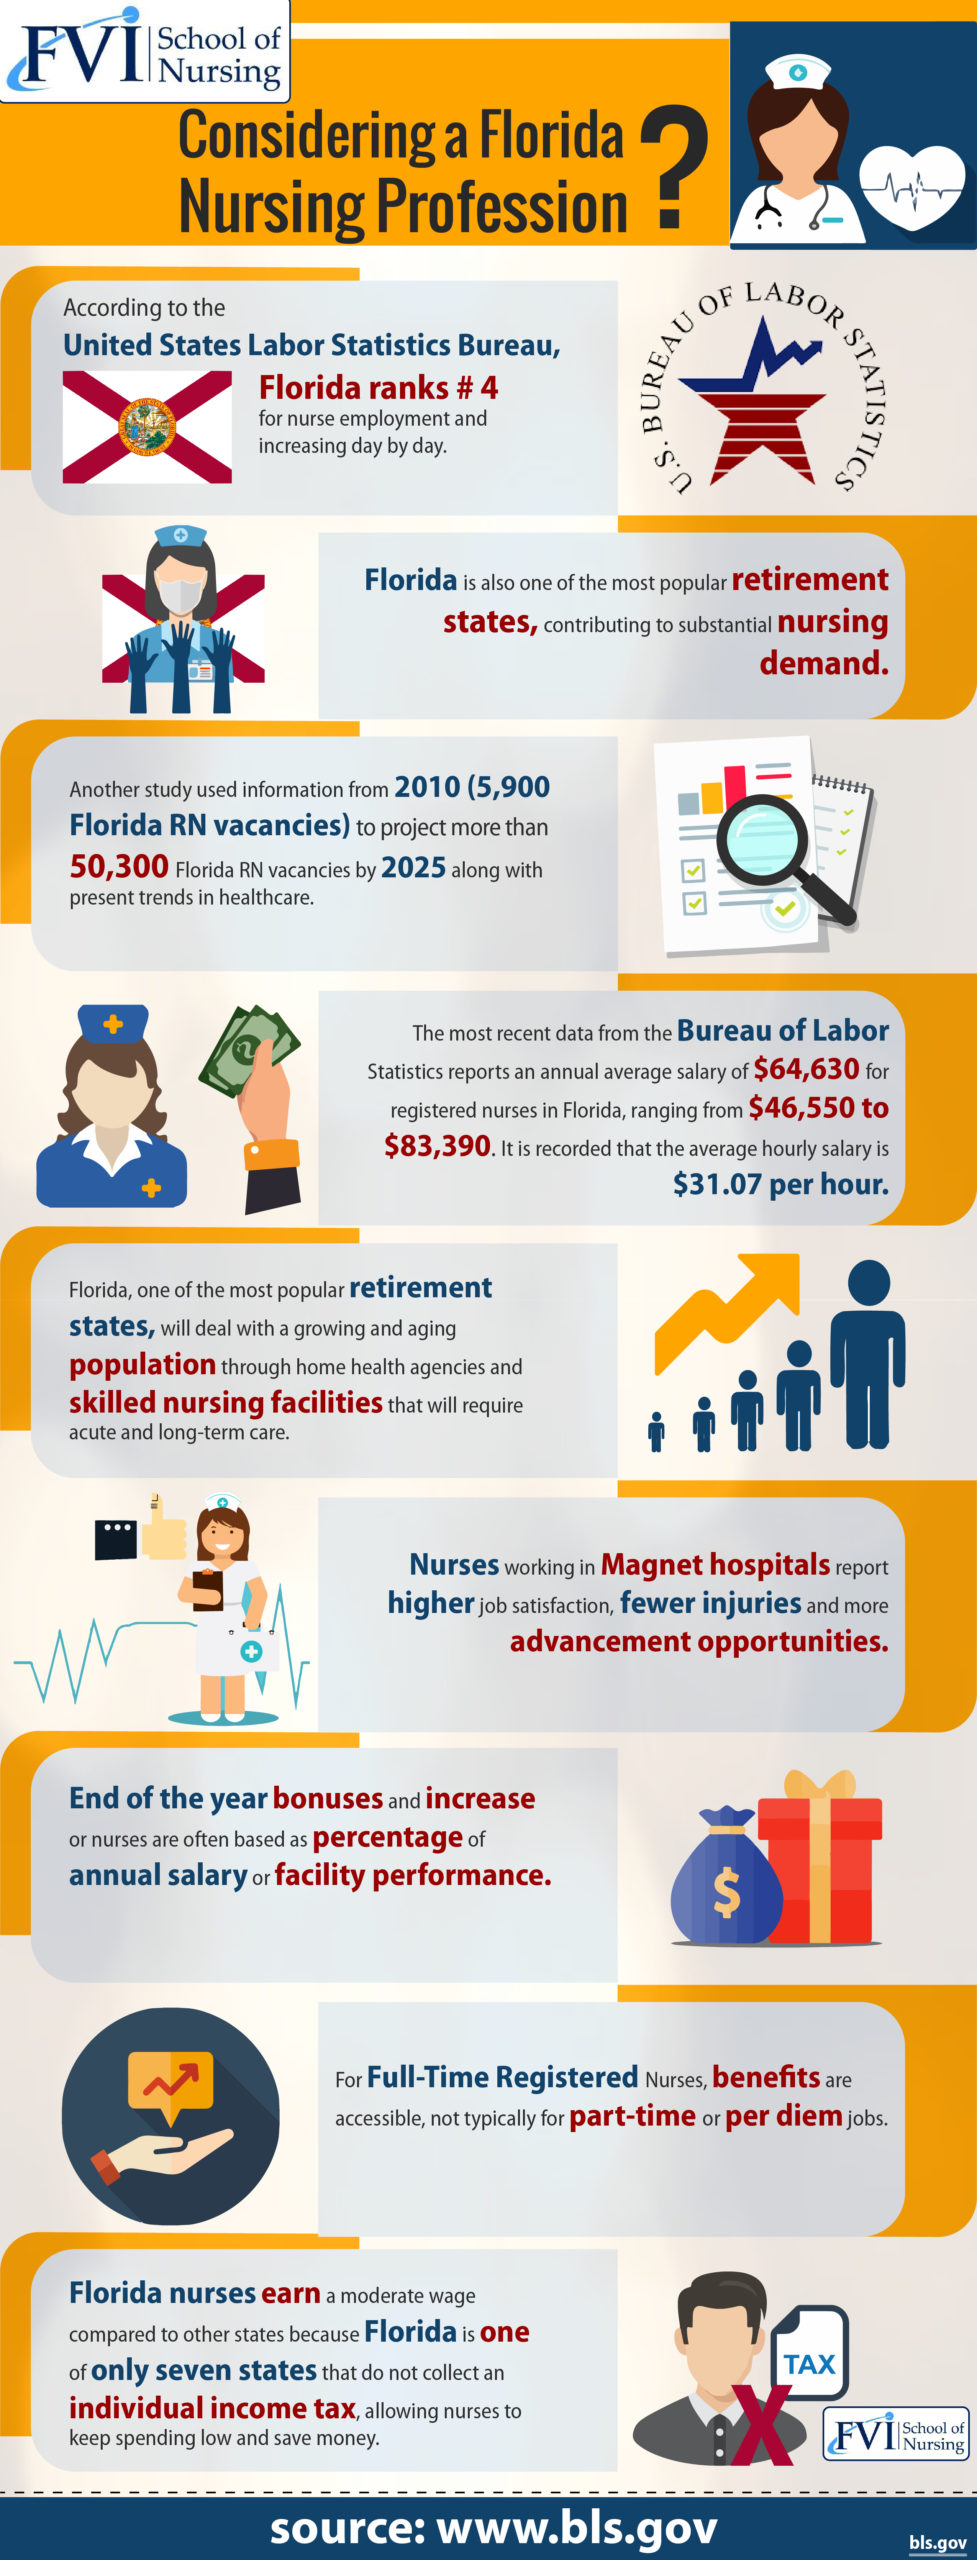 Why Become a Nurse in Florida? | 5 Reasons to Become a Nurse in Florida